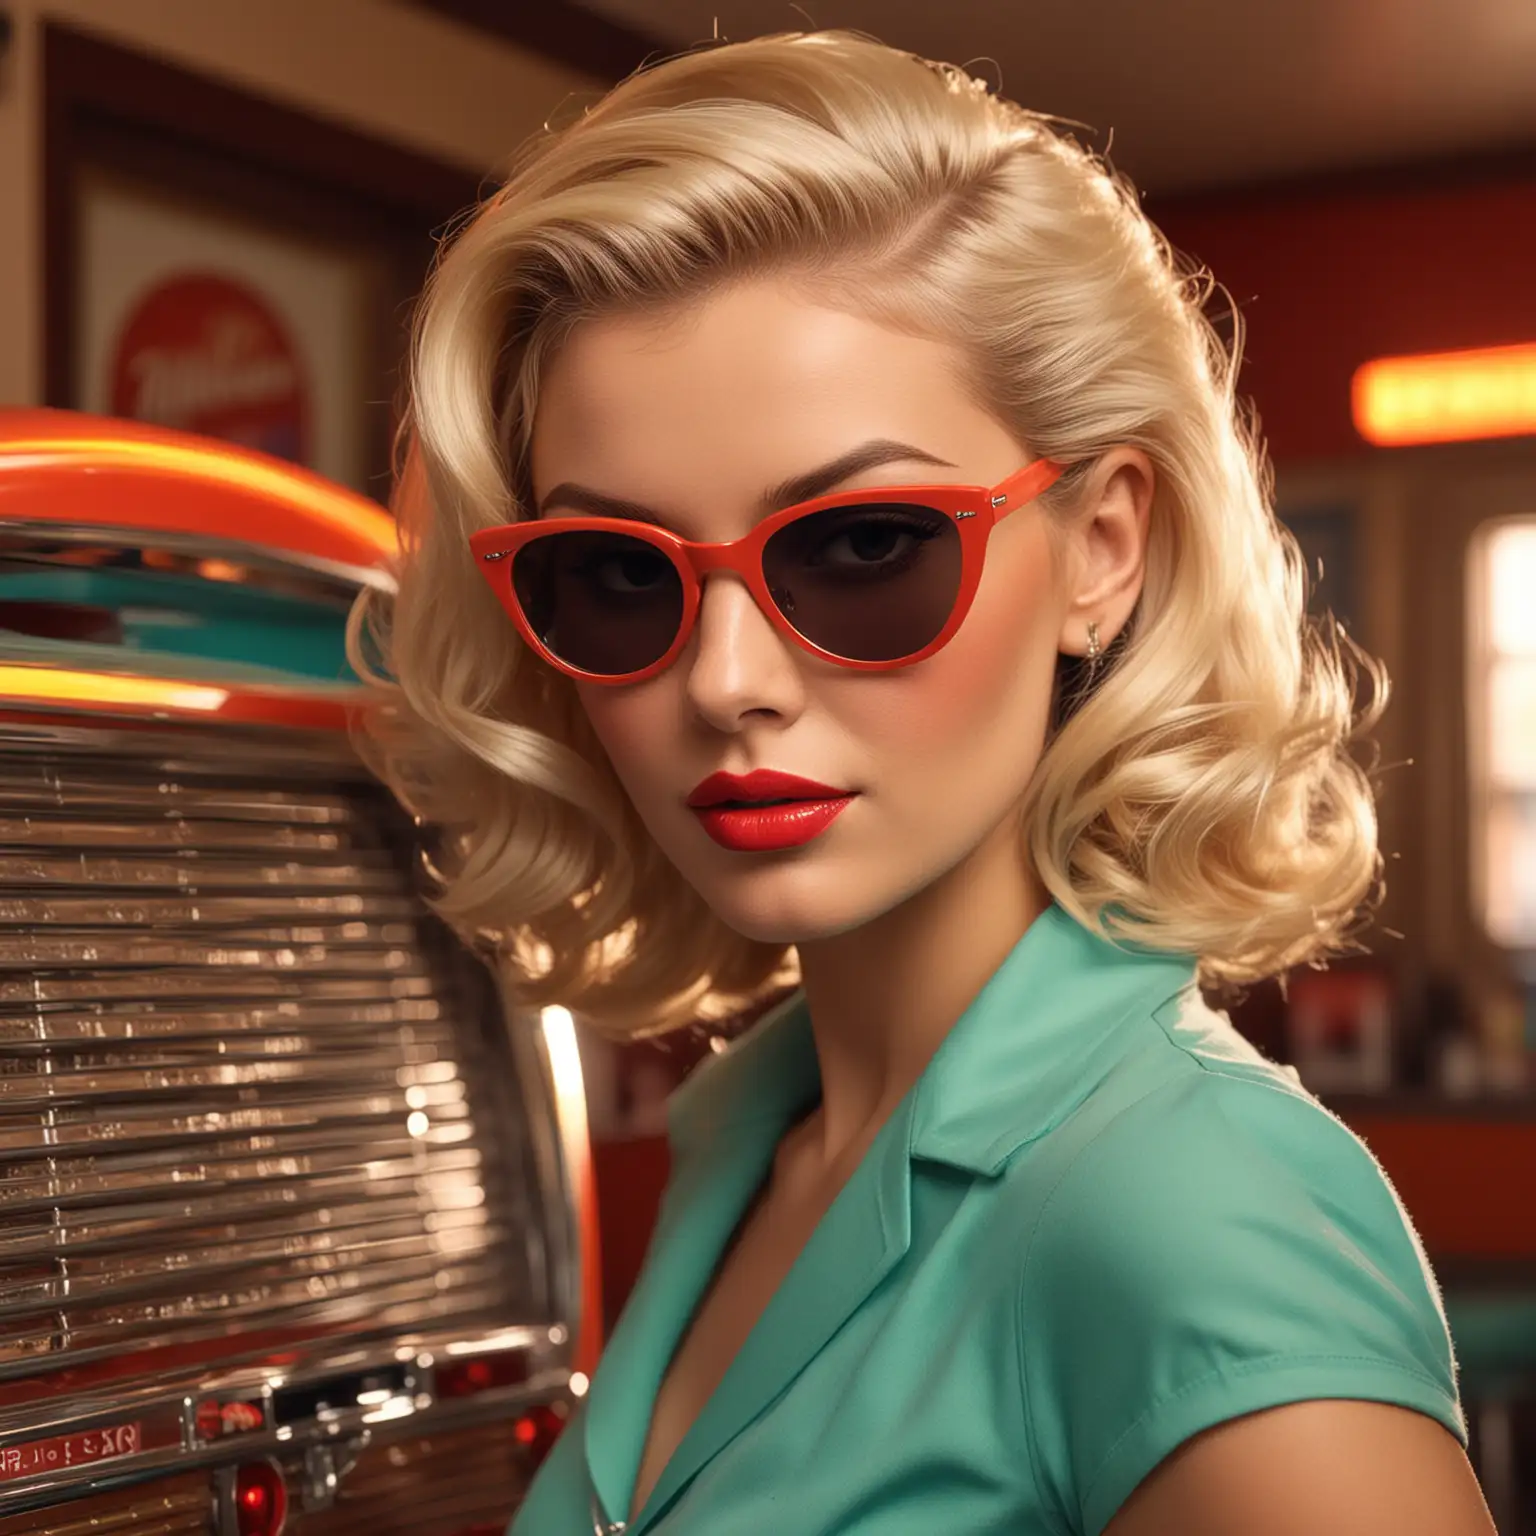 1950s Style Blonde Supermodel at Colorful Diner with Jukebox